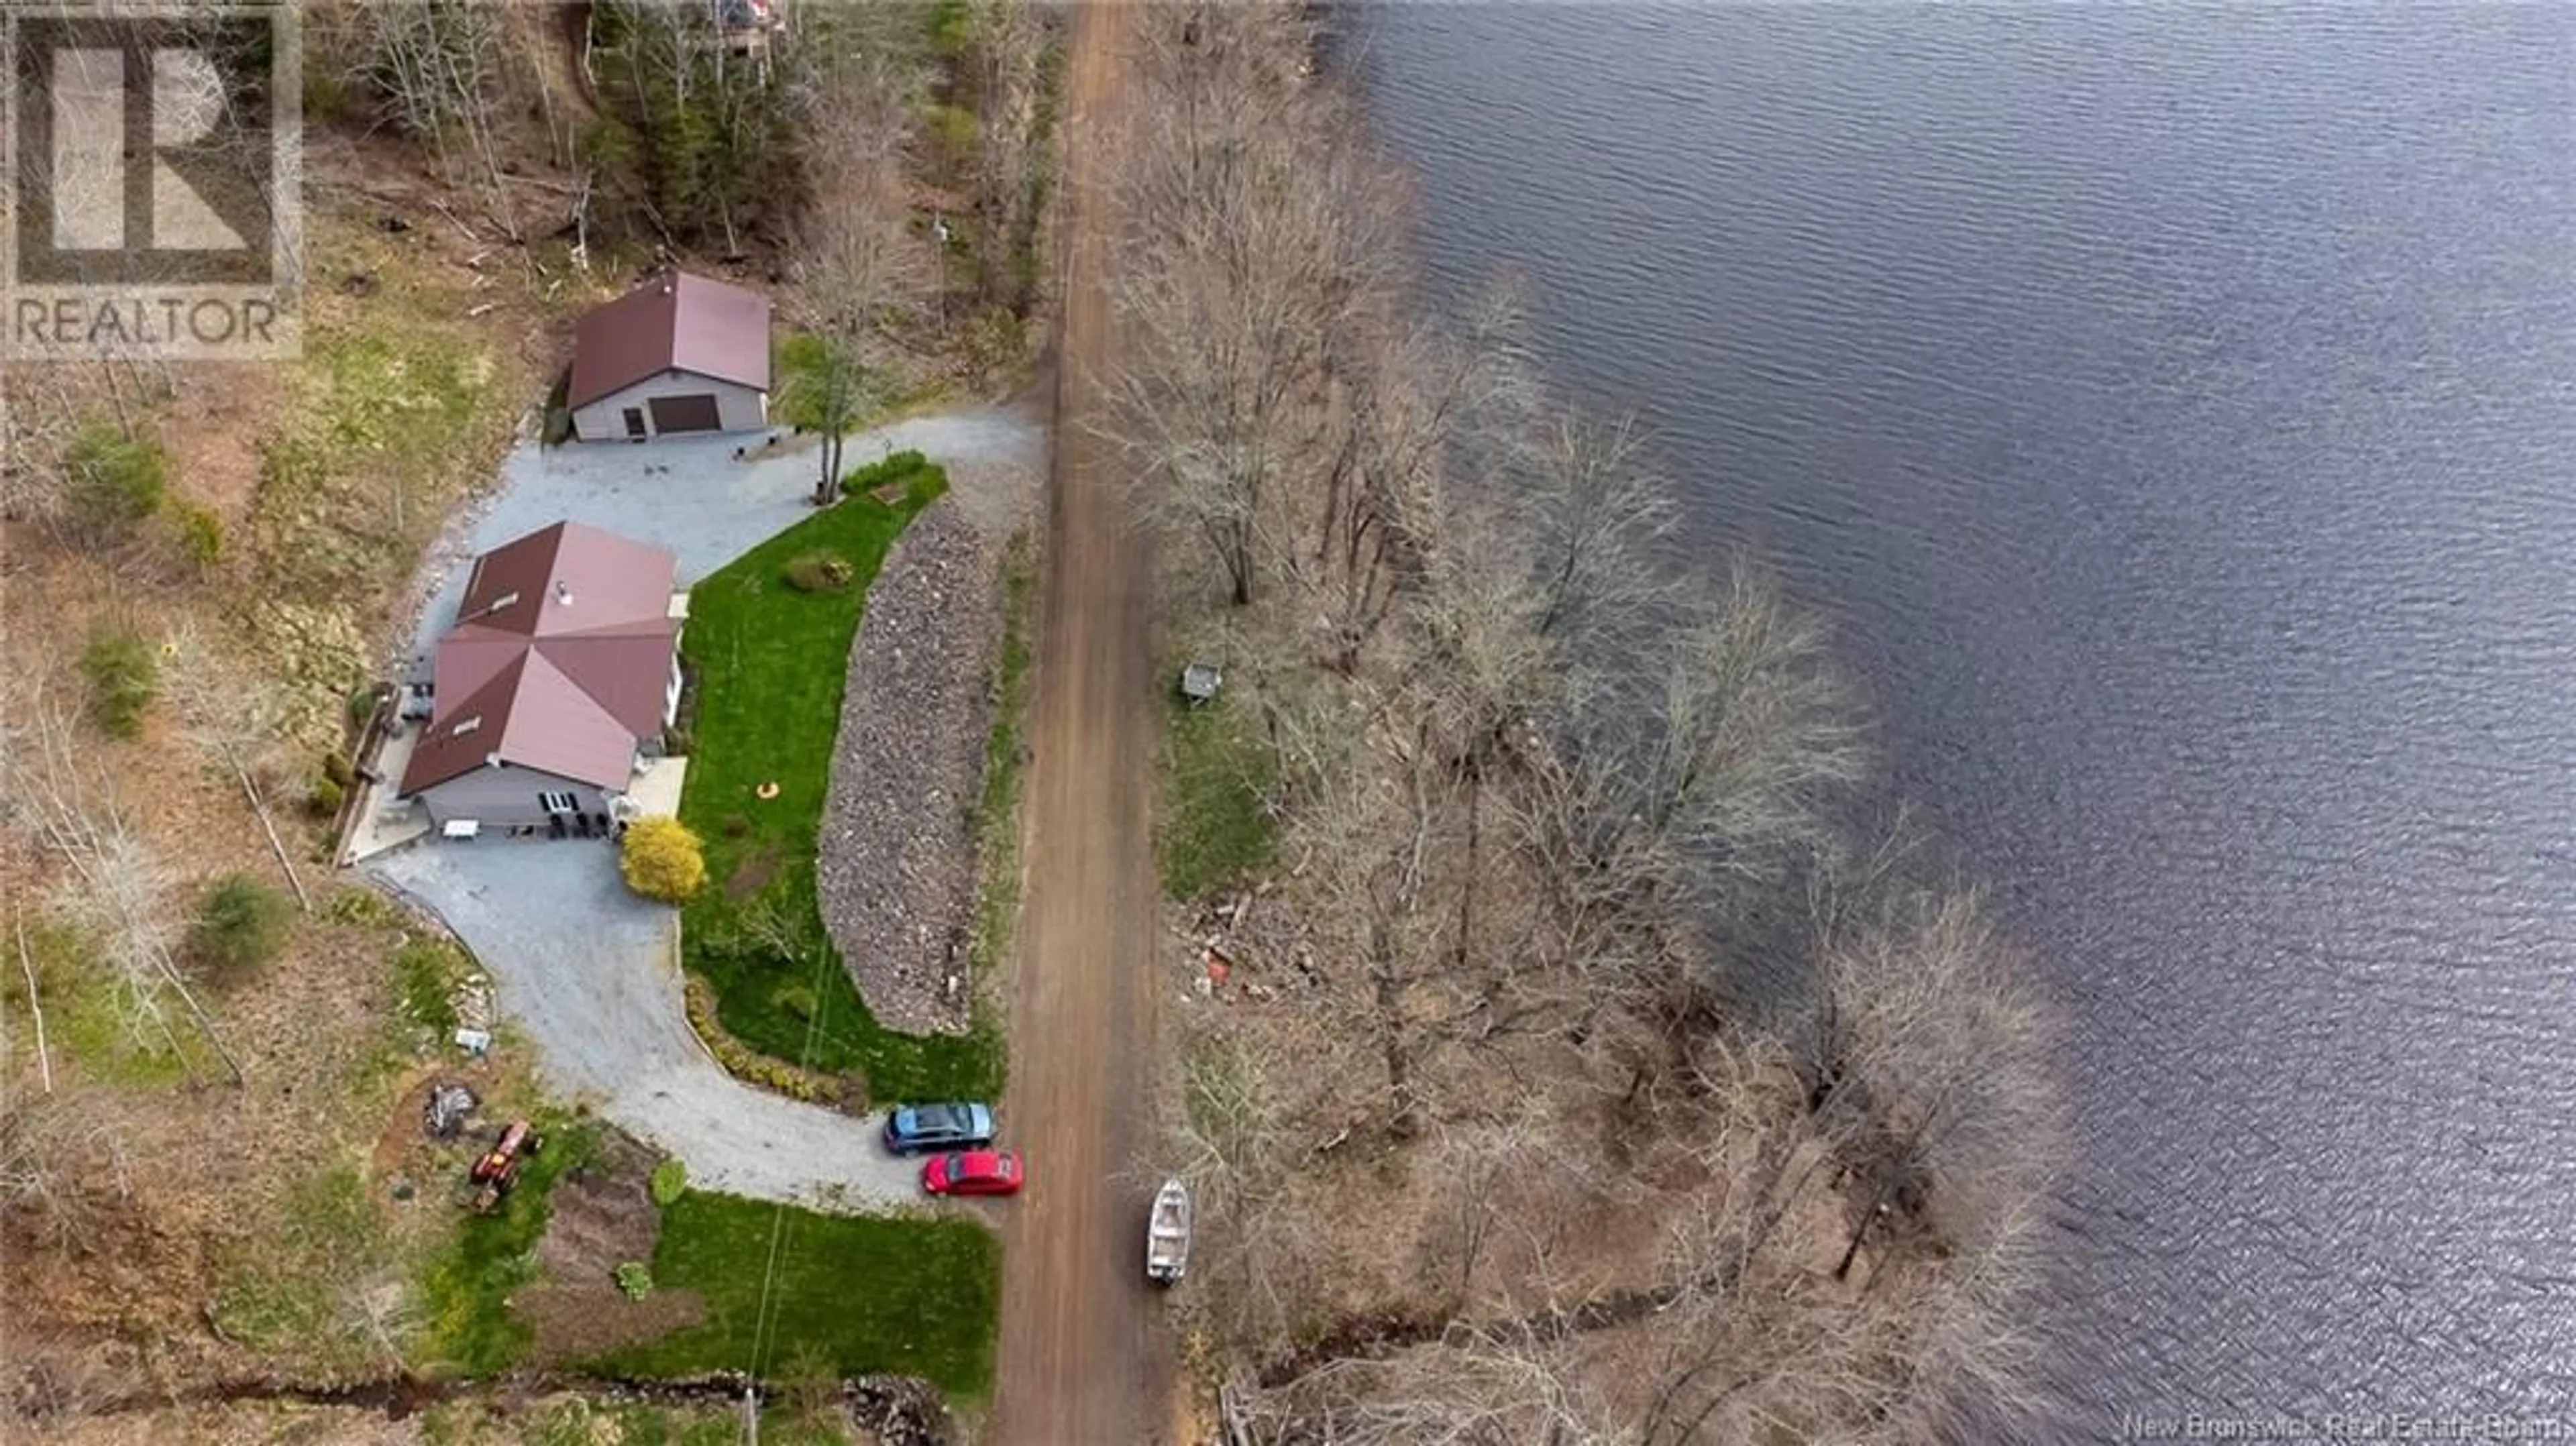 Lakeview for 264 West Tennants Cove Road, Kars New Brunswick E5T3G6